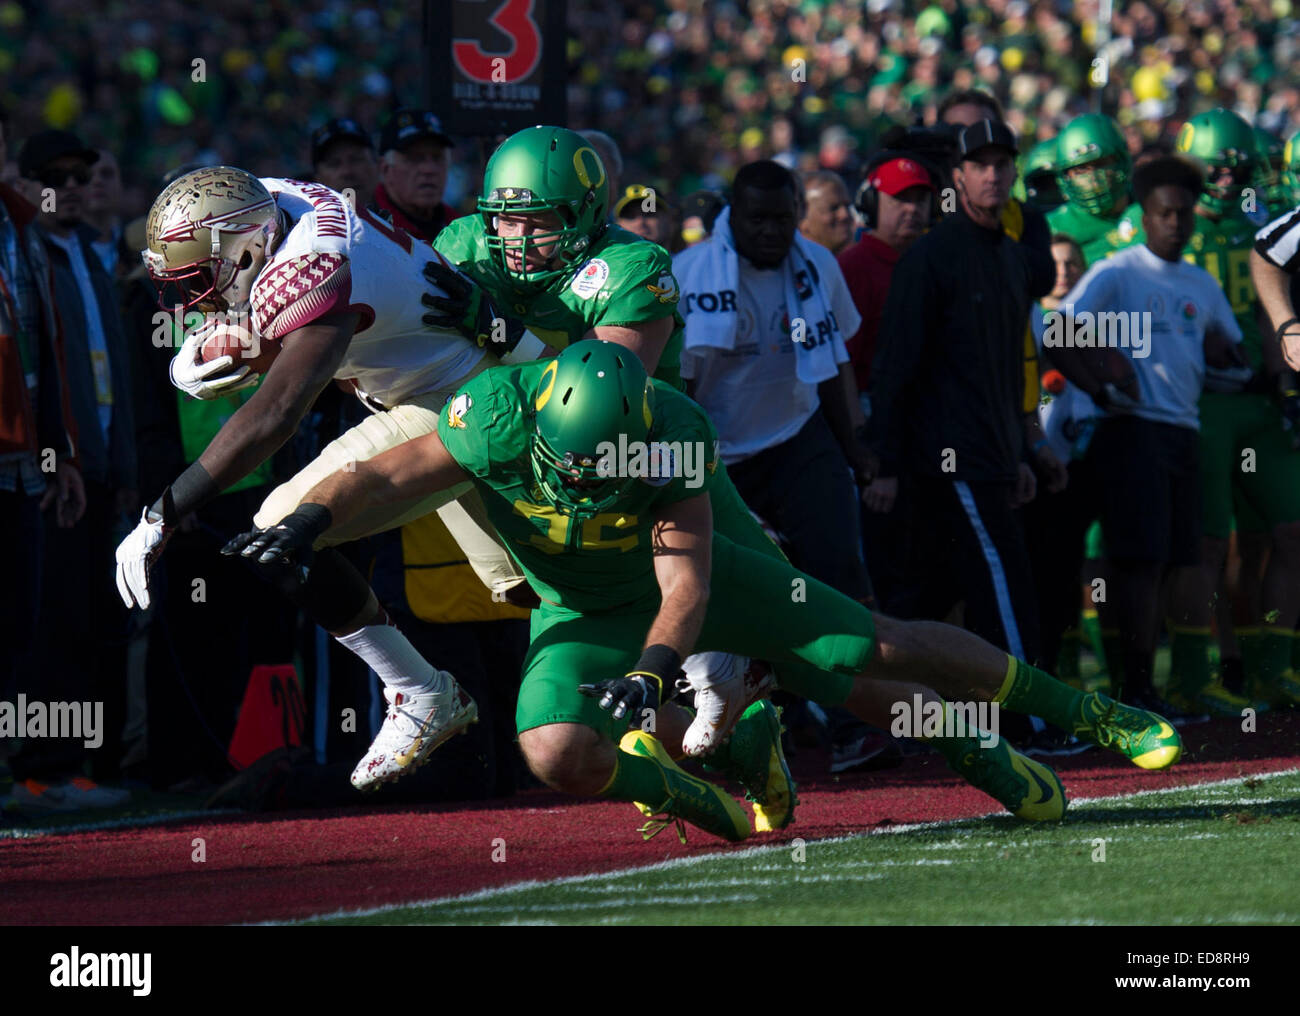 Los Angeles, USA. 1st Jan, 2015. Karlos Williams (1st L) of Florida State Seminoles breaks through during the 2015 Rose Bowl college football game against the Oregon Ducks at Rose Bowl in Los Angeles, the United States, Jan. 1, 2015. Oregon Ducks won the game 59-20. Credit:  Yang Lei/Xinhua/Alamy Live News Stock Photo